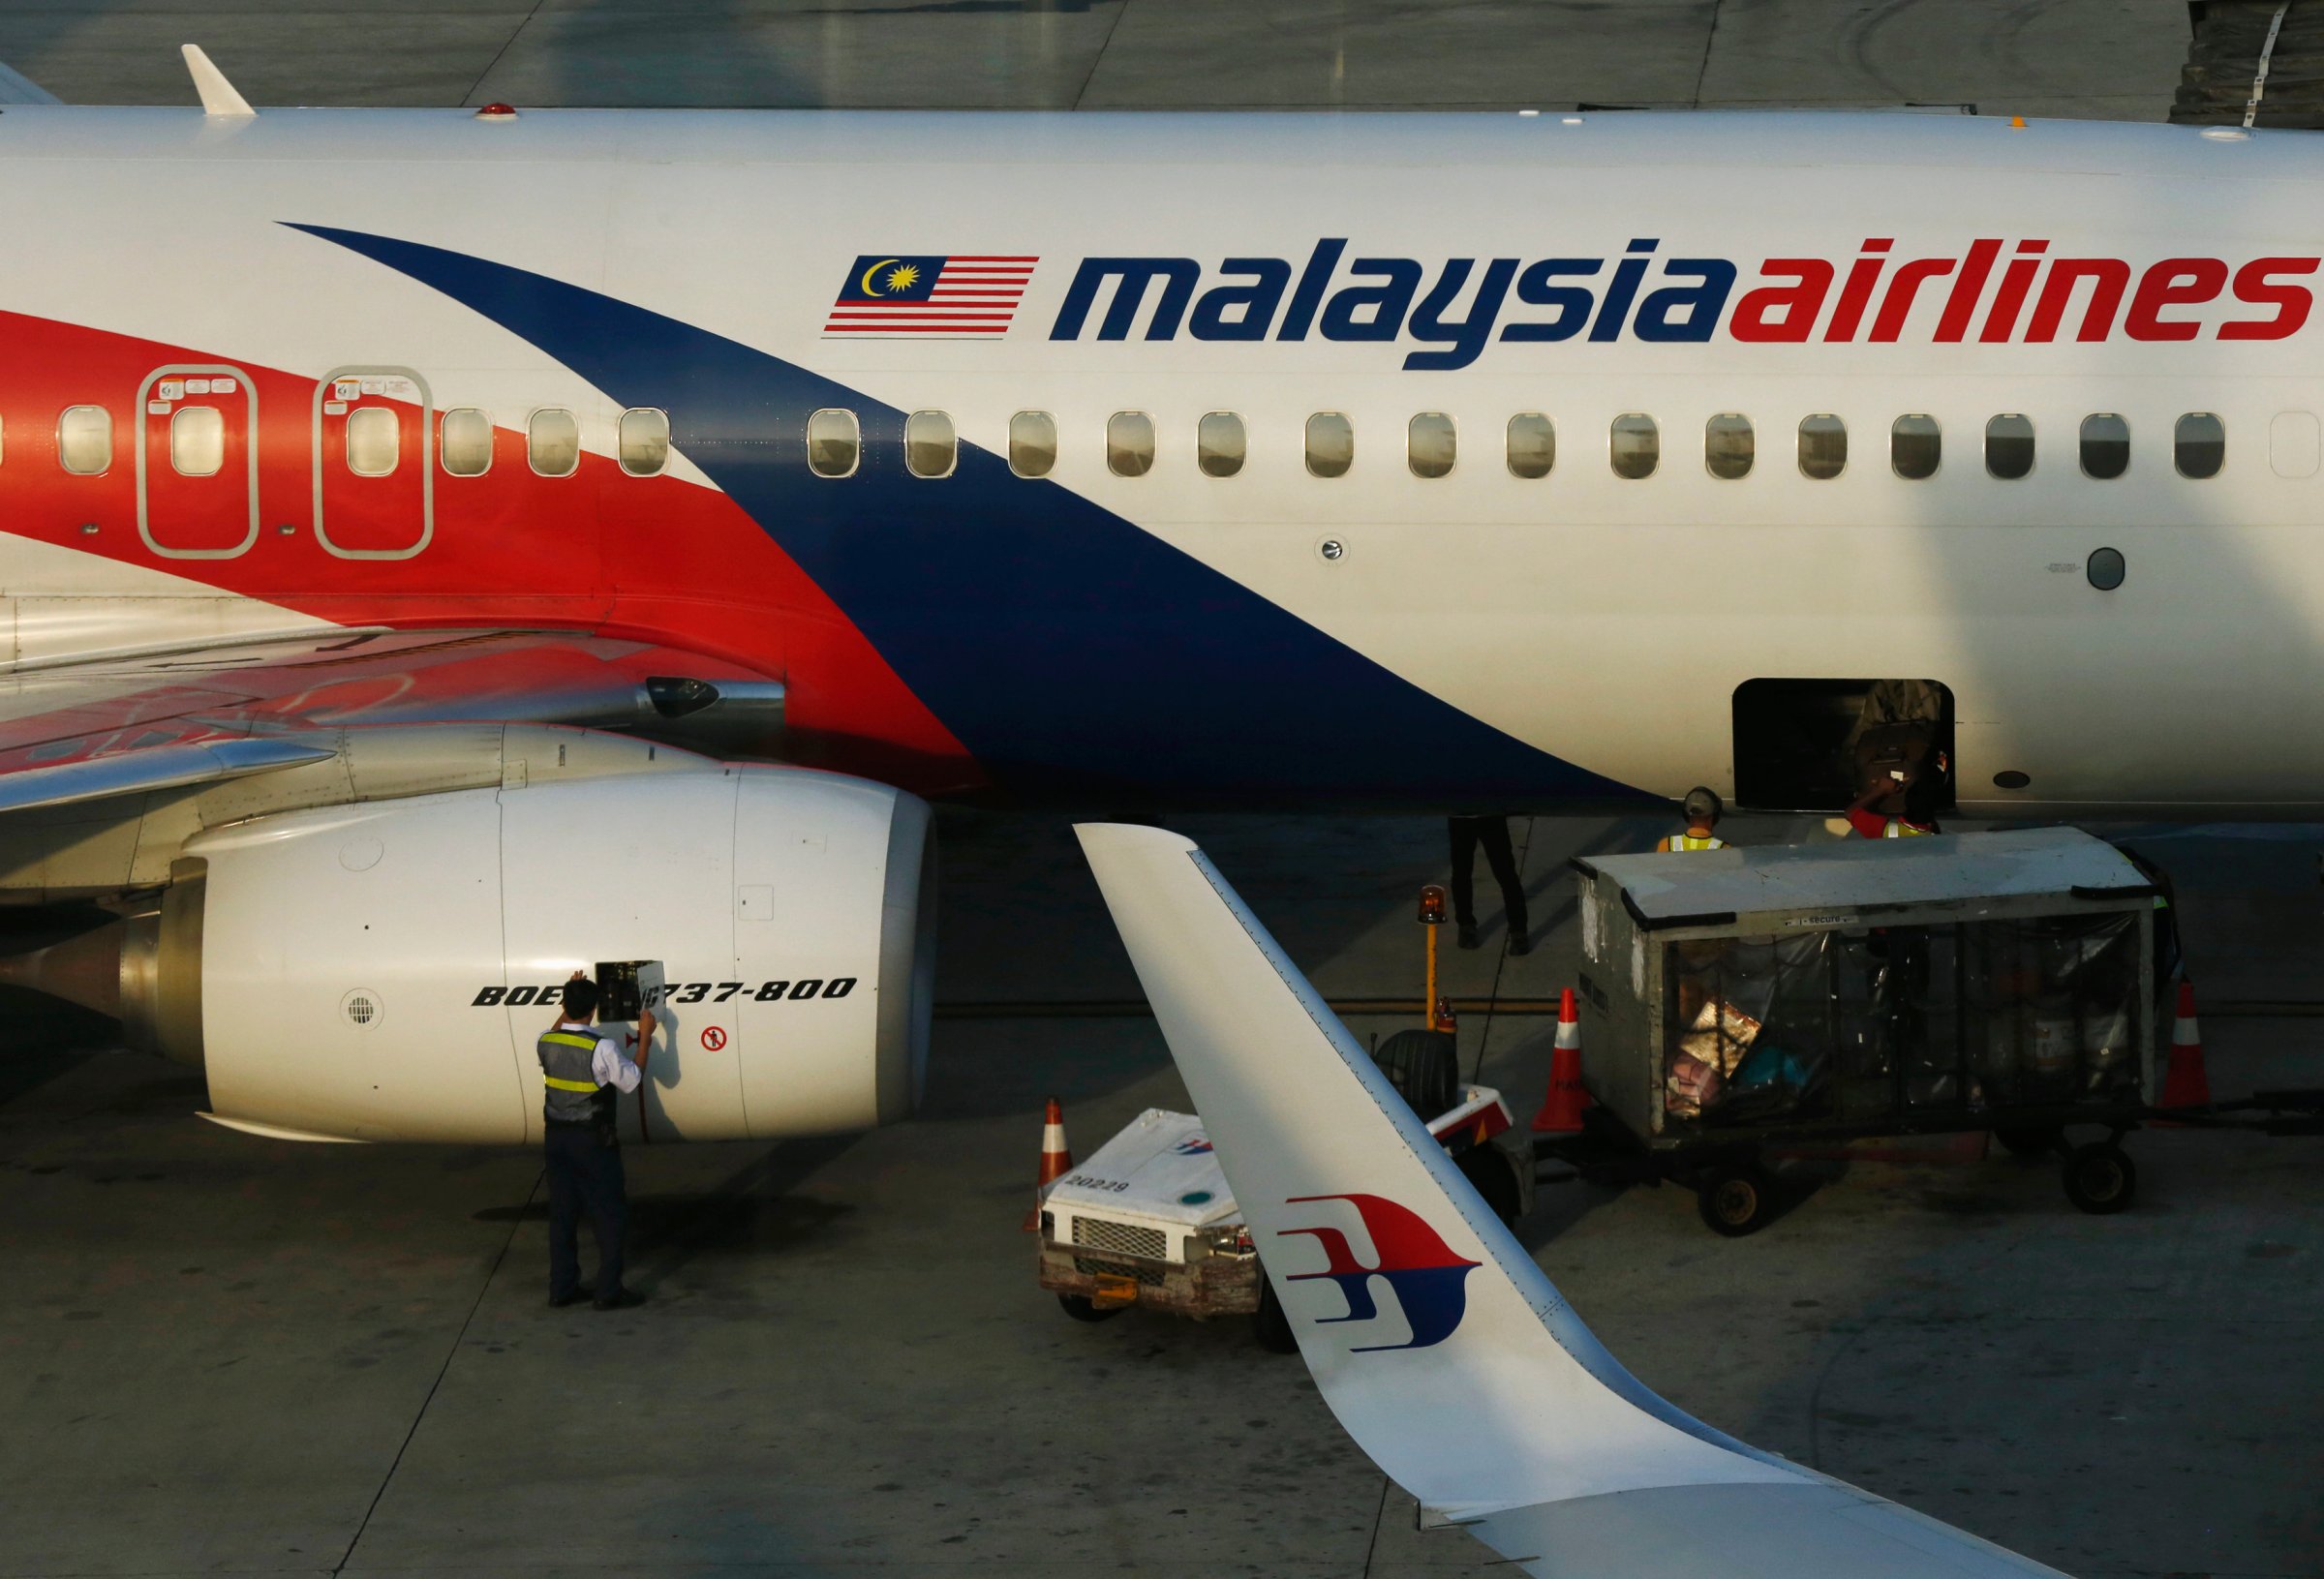 A member of ground crew works on a Malaysia Airlines Boeing 737-800 airplane on the runway at Kuala Lumpur International Airport in Sepang